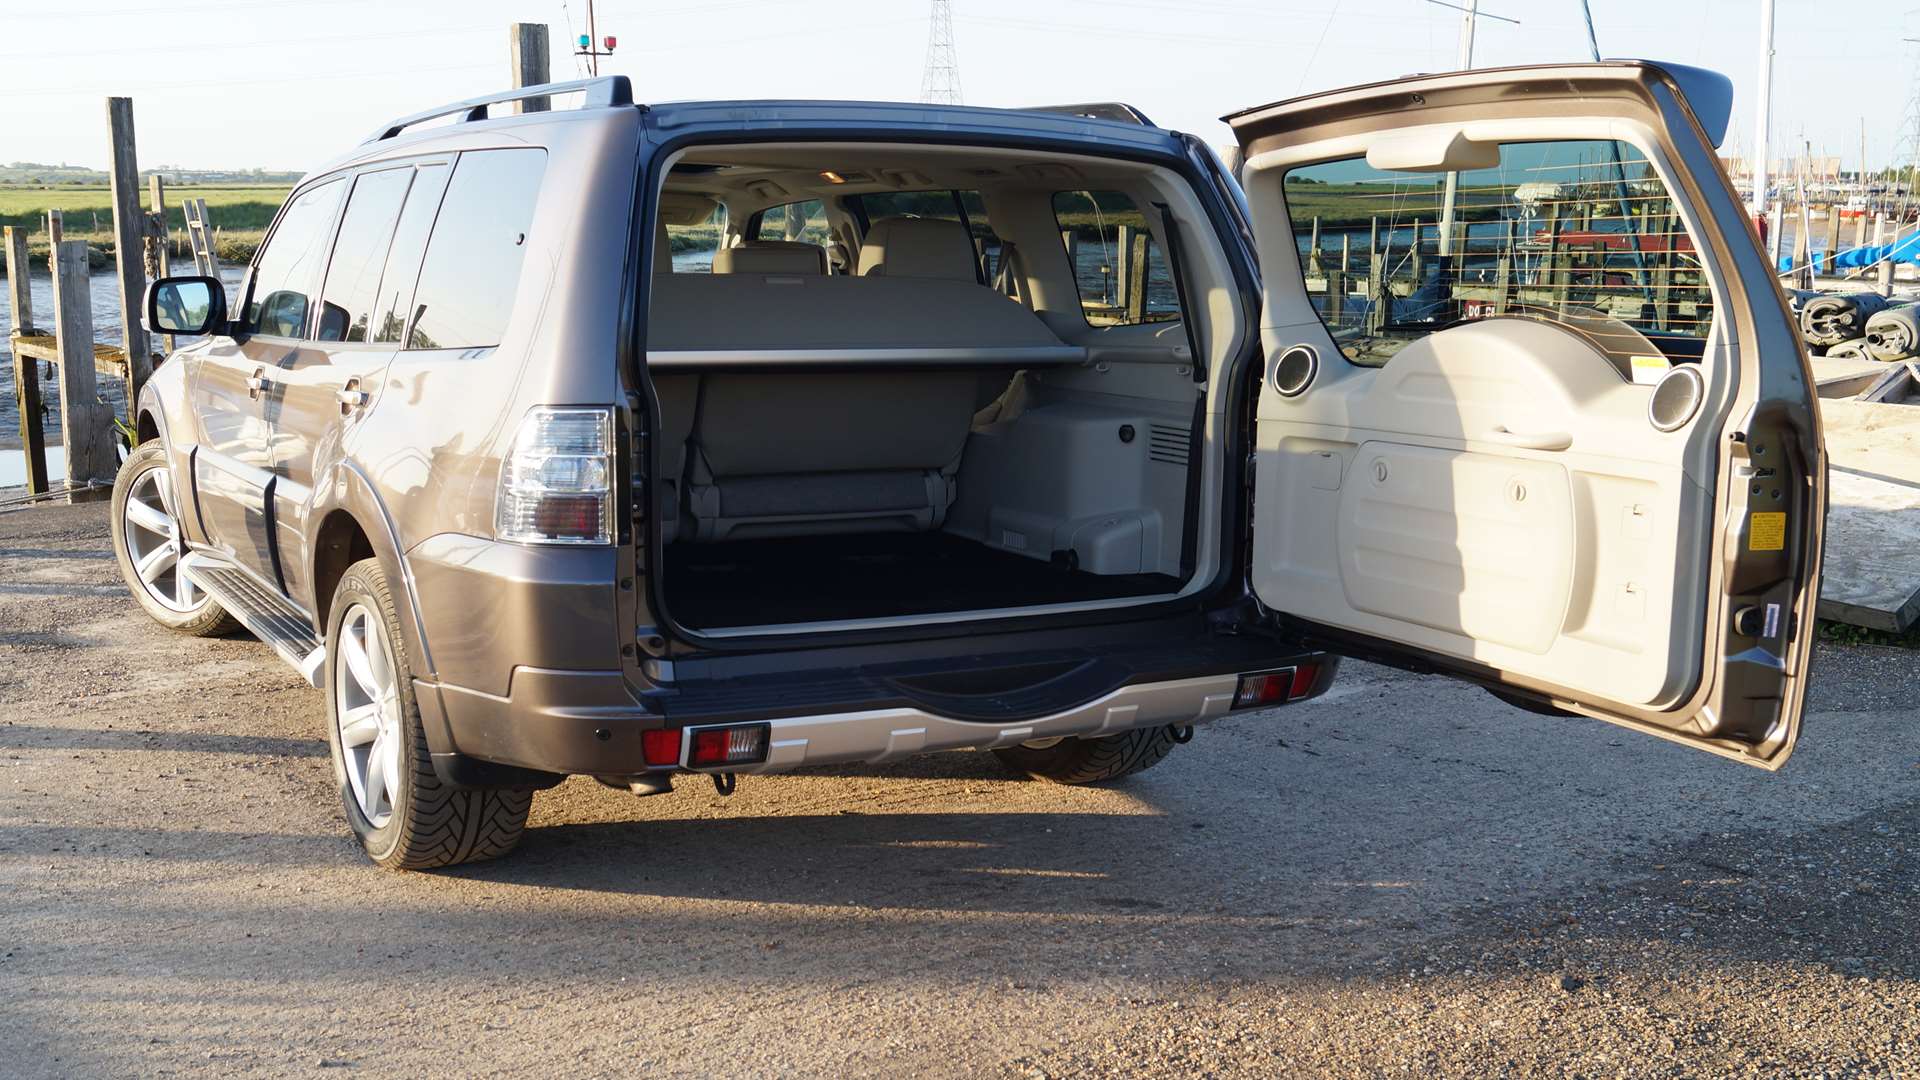 The boot will easily take all your luggage, or two extra passengers